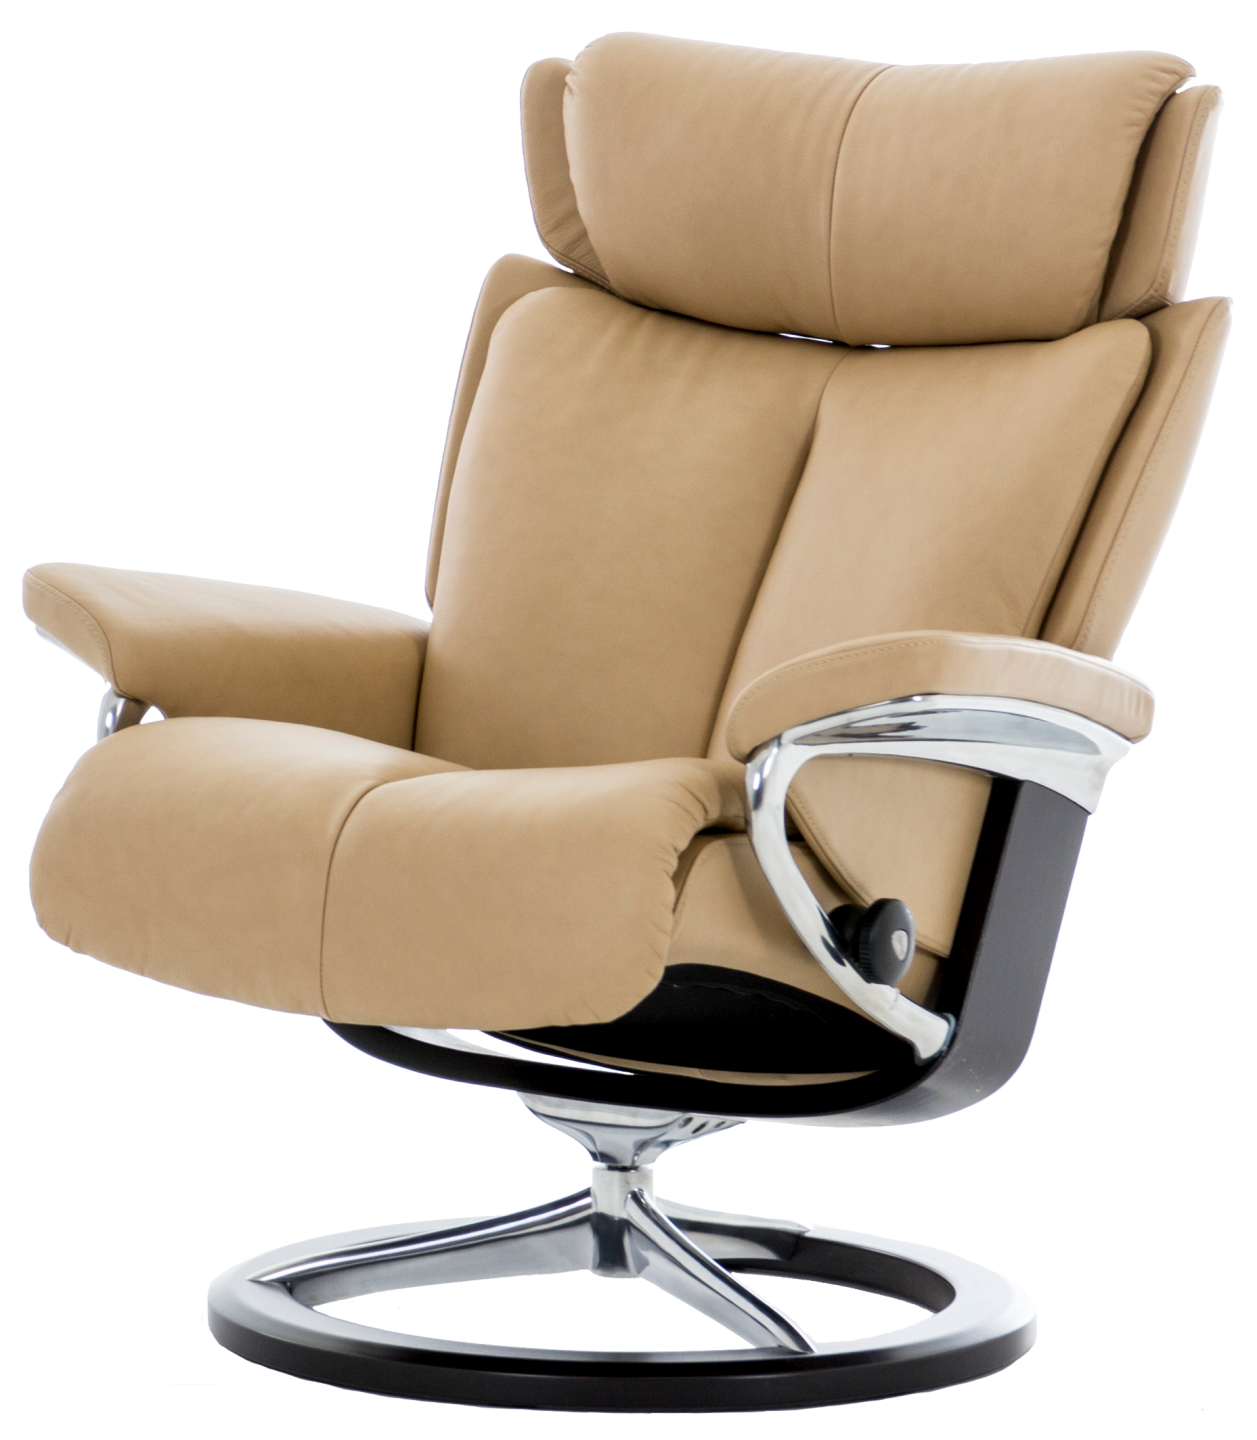 Stressless Magic relaxfauteuil Wagenmans